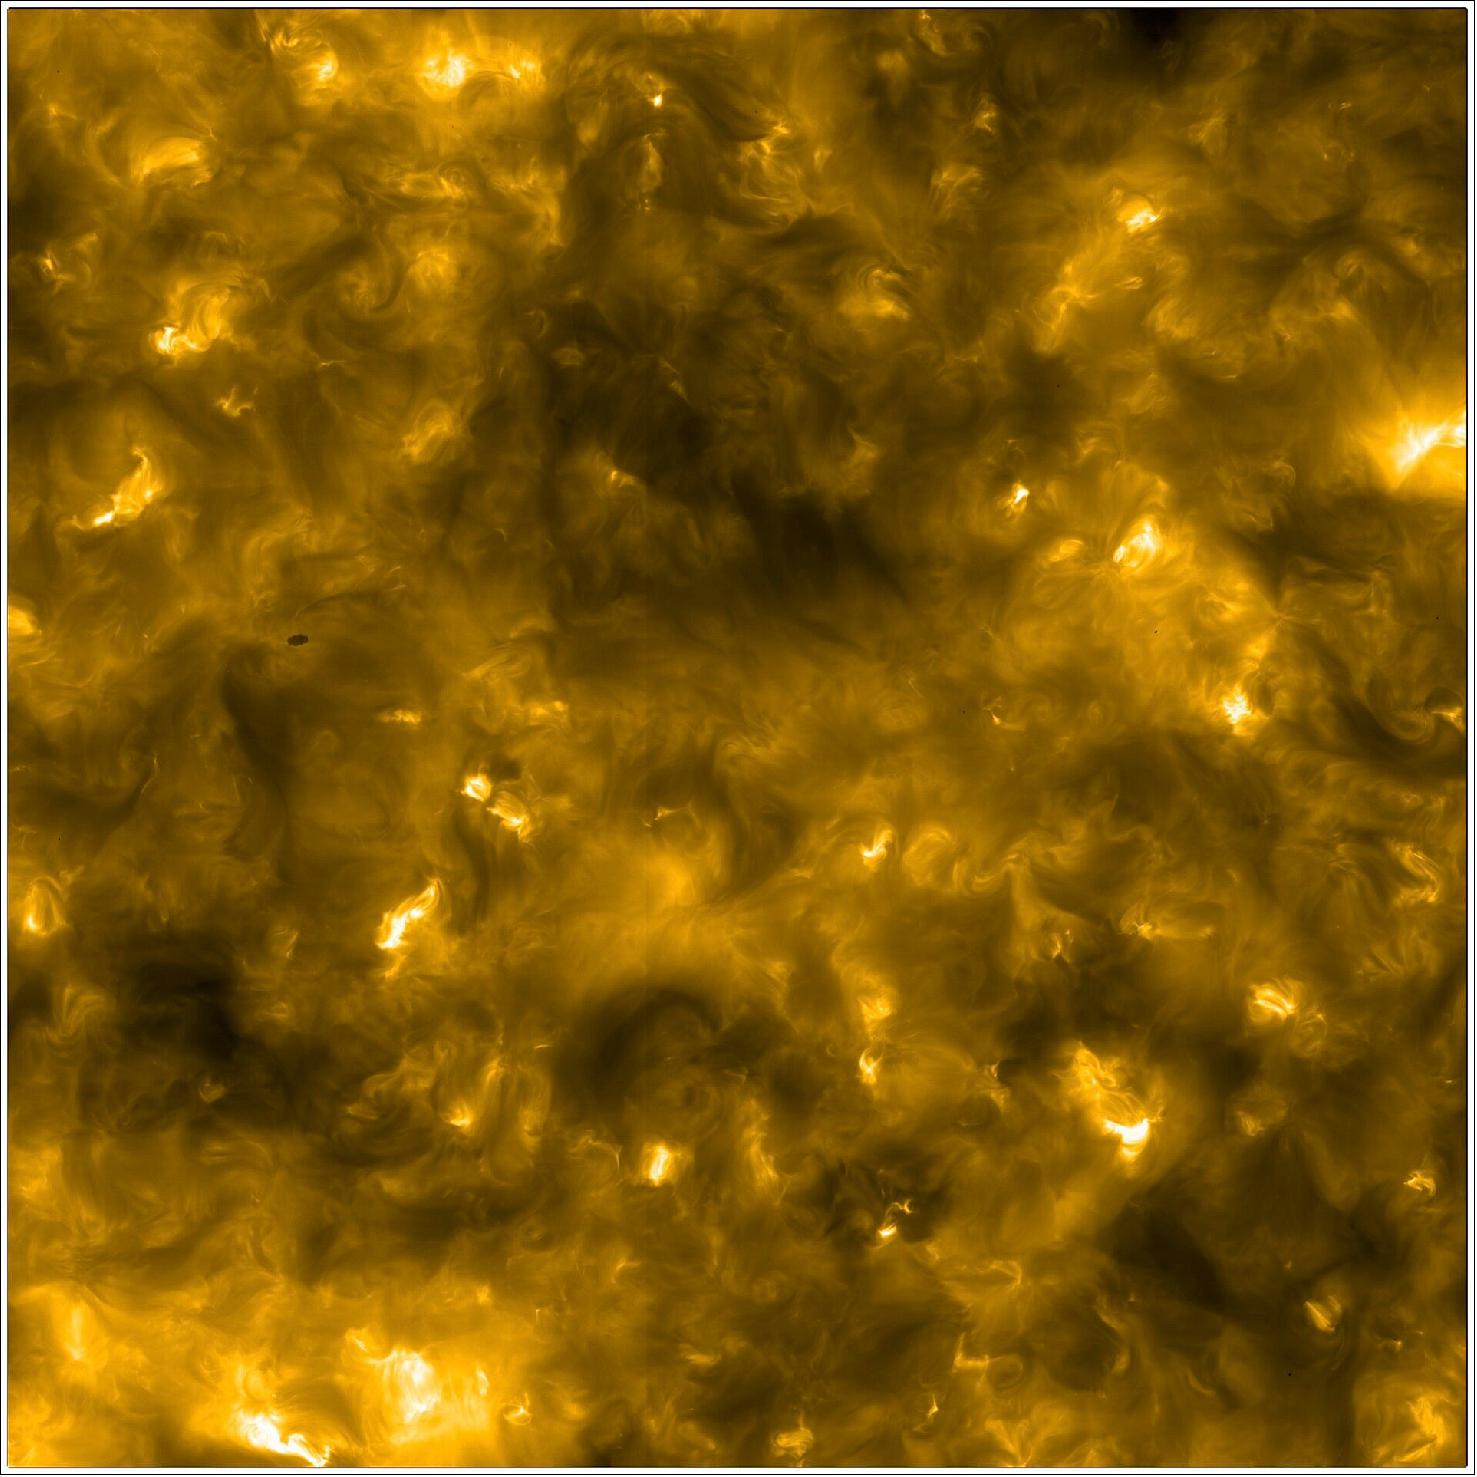 Figure 36: An image of the Sun's outer atmosphere, the corona, taken with the Extreme Ultraviolet Imager (EUI) instrument onboard Solar Orbiter. This particular image was taken by EUI's High Resolution Imager working at the extreme ultraviolet wavelength 17.4 nm (HRIEUV). Taken on 23 February 2021, this image shows 384x384 thousand km of the solar surface. For comparison the diameter of the Earth is~12.7 thousand km. On 23 February 2021, the Sun's activity was quiet but HRIEUV still captured comparatively small-scale jet activity on the Sun. This dynamic activity is associated with the so-called campfires, which are miniature solar flares that scientists discovered on the Sun with the EUI instrument shortly after Solar Orbiter's launch (image credit: Solar Orbiter/EUI Team/ESA & NASA)